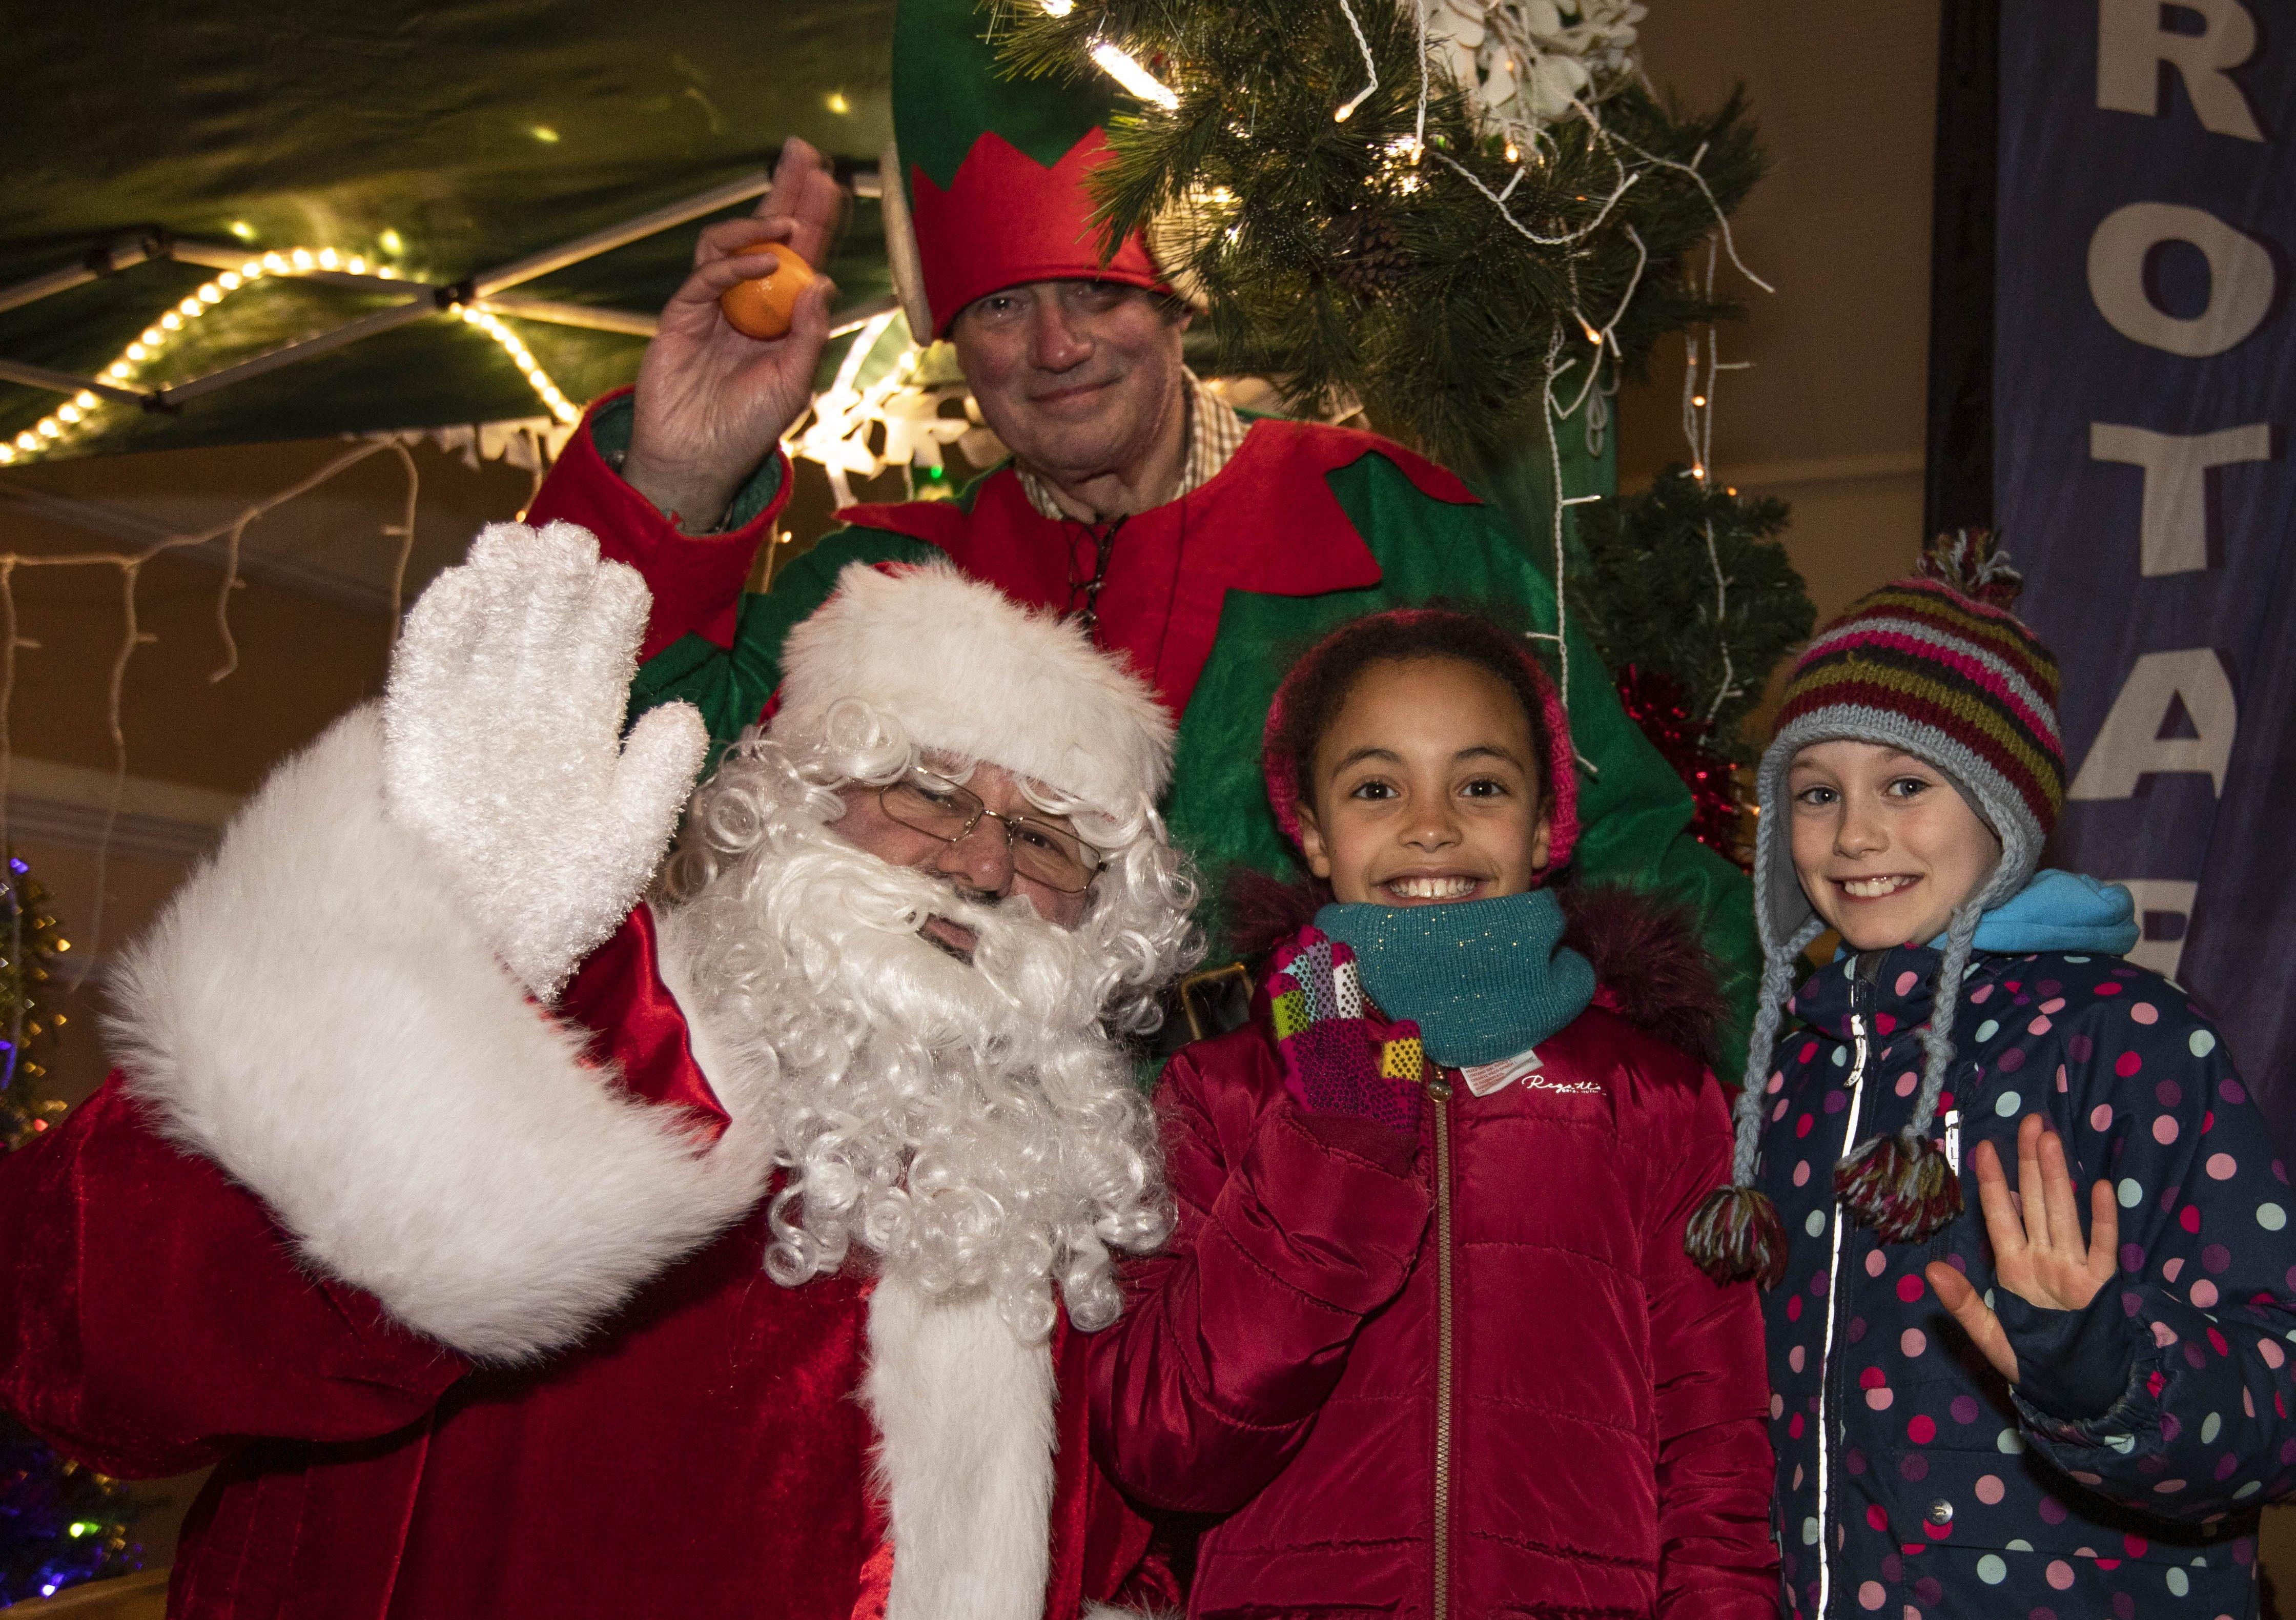 India Forrest and Olivia Penny with Santa in Melrose.